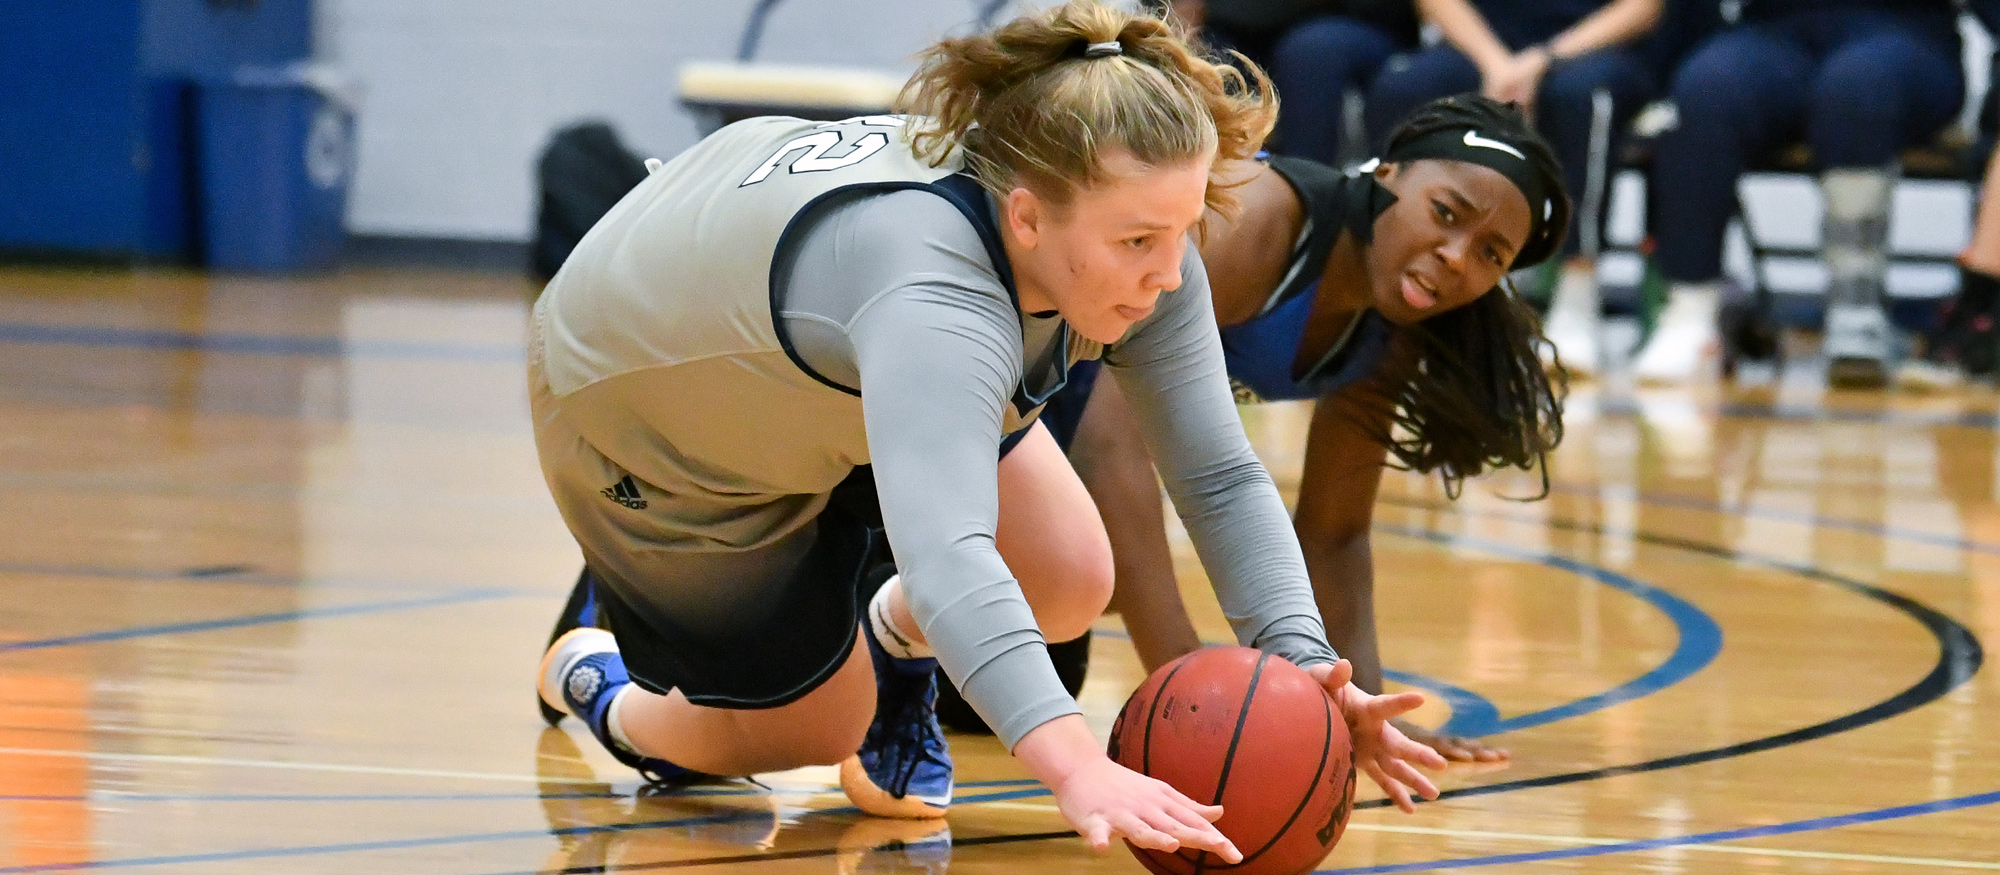 Cal McGonagle had a game-high 16 points with nine rebounds, three assists and three steals in Mount Holyoke's 68-36 loss to Elms College on Nov. 16, 2022. (RJB Sports file photo)